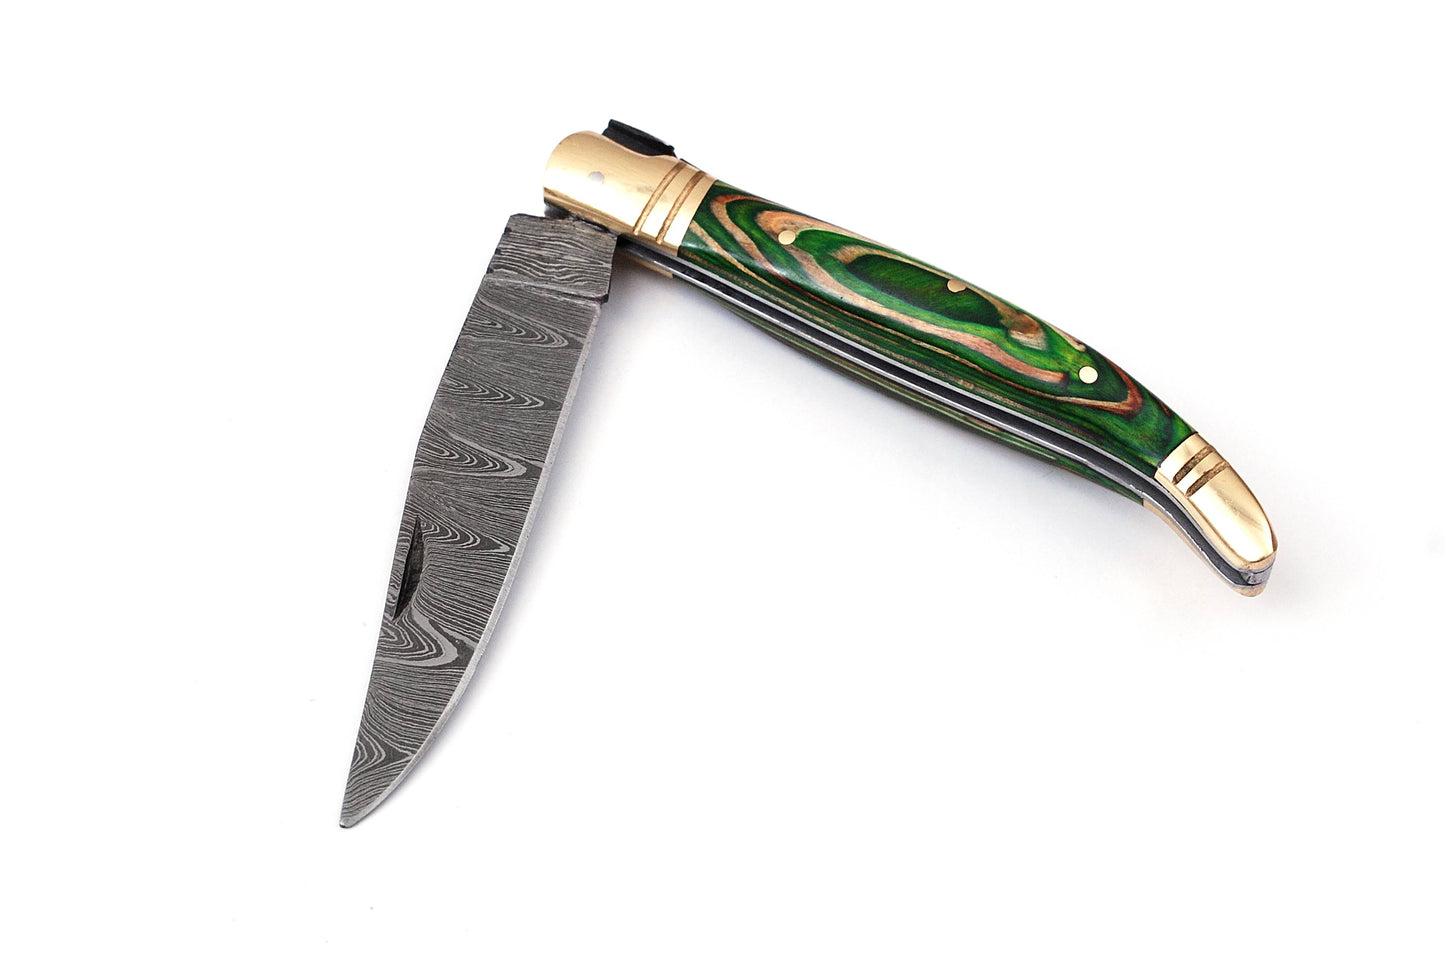 Folding Damascus steel knife, 8.5" Long with 4" hand forged custom twist pattern Blade.2 tone green wood scale with brass bolster, Cow hide leather sheath included